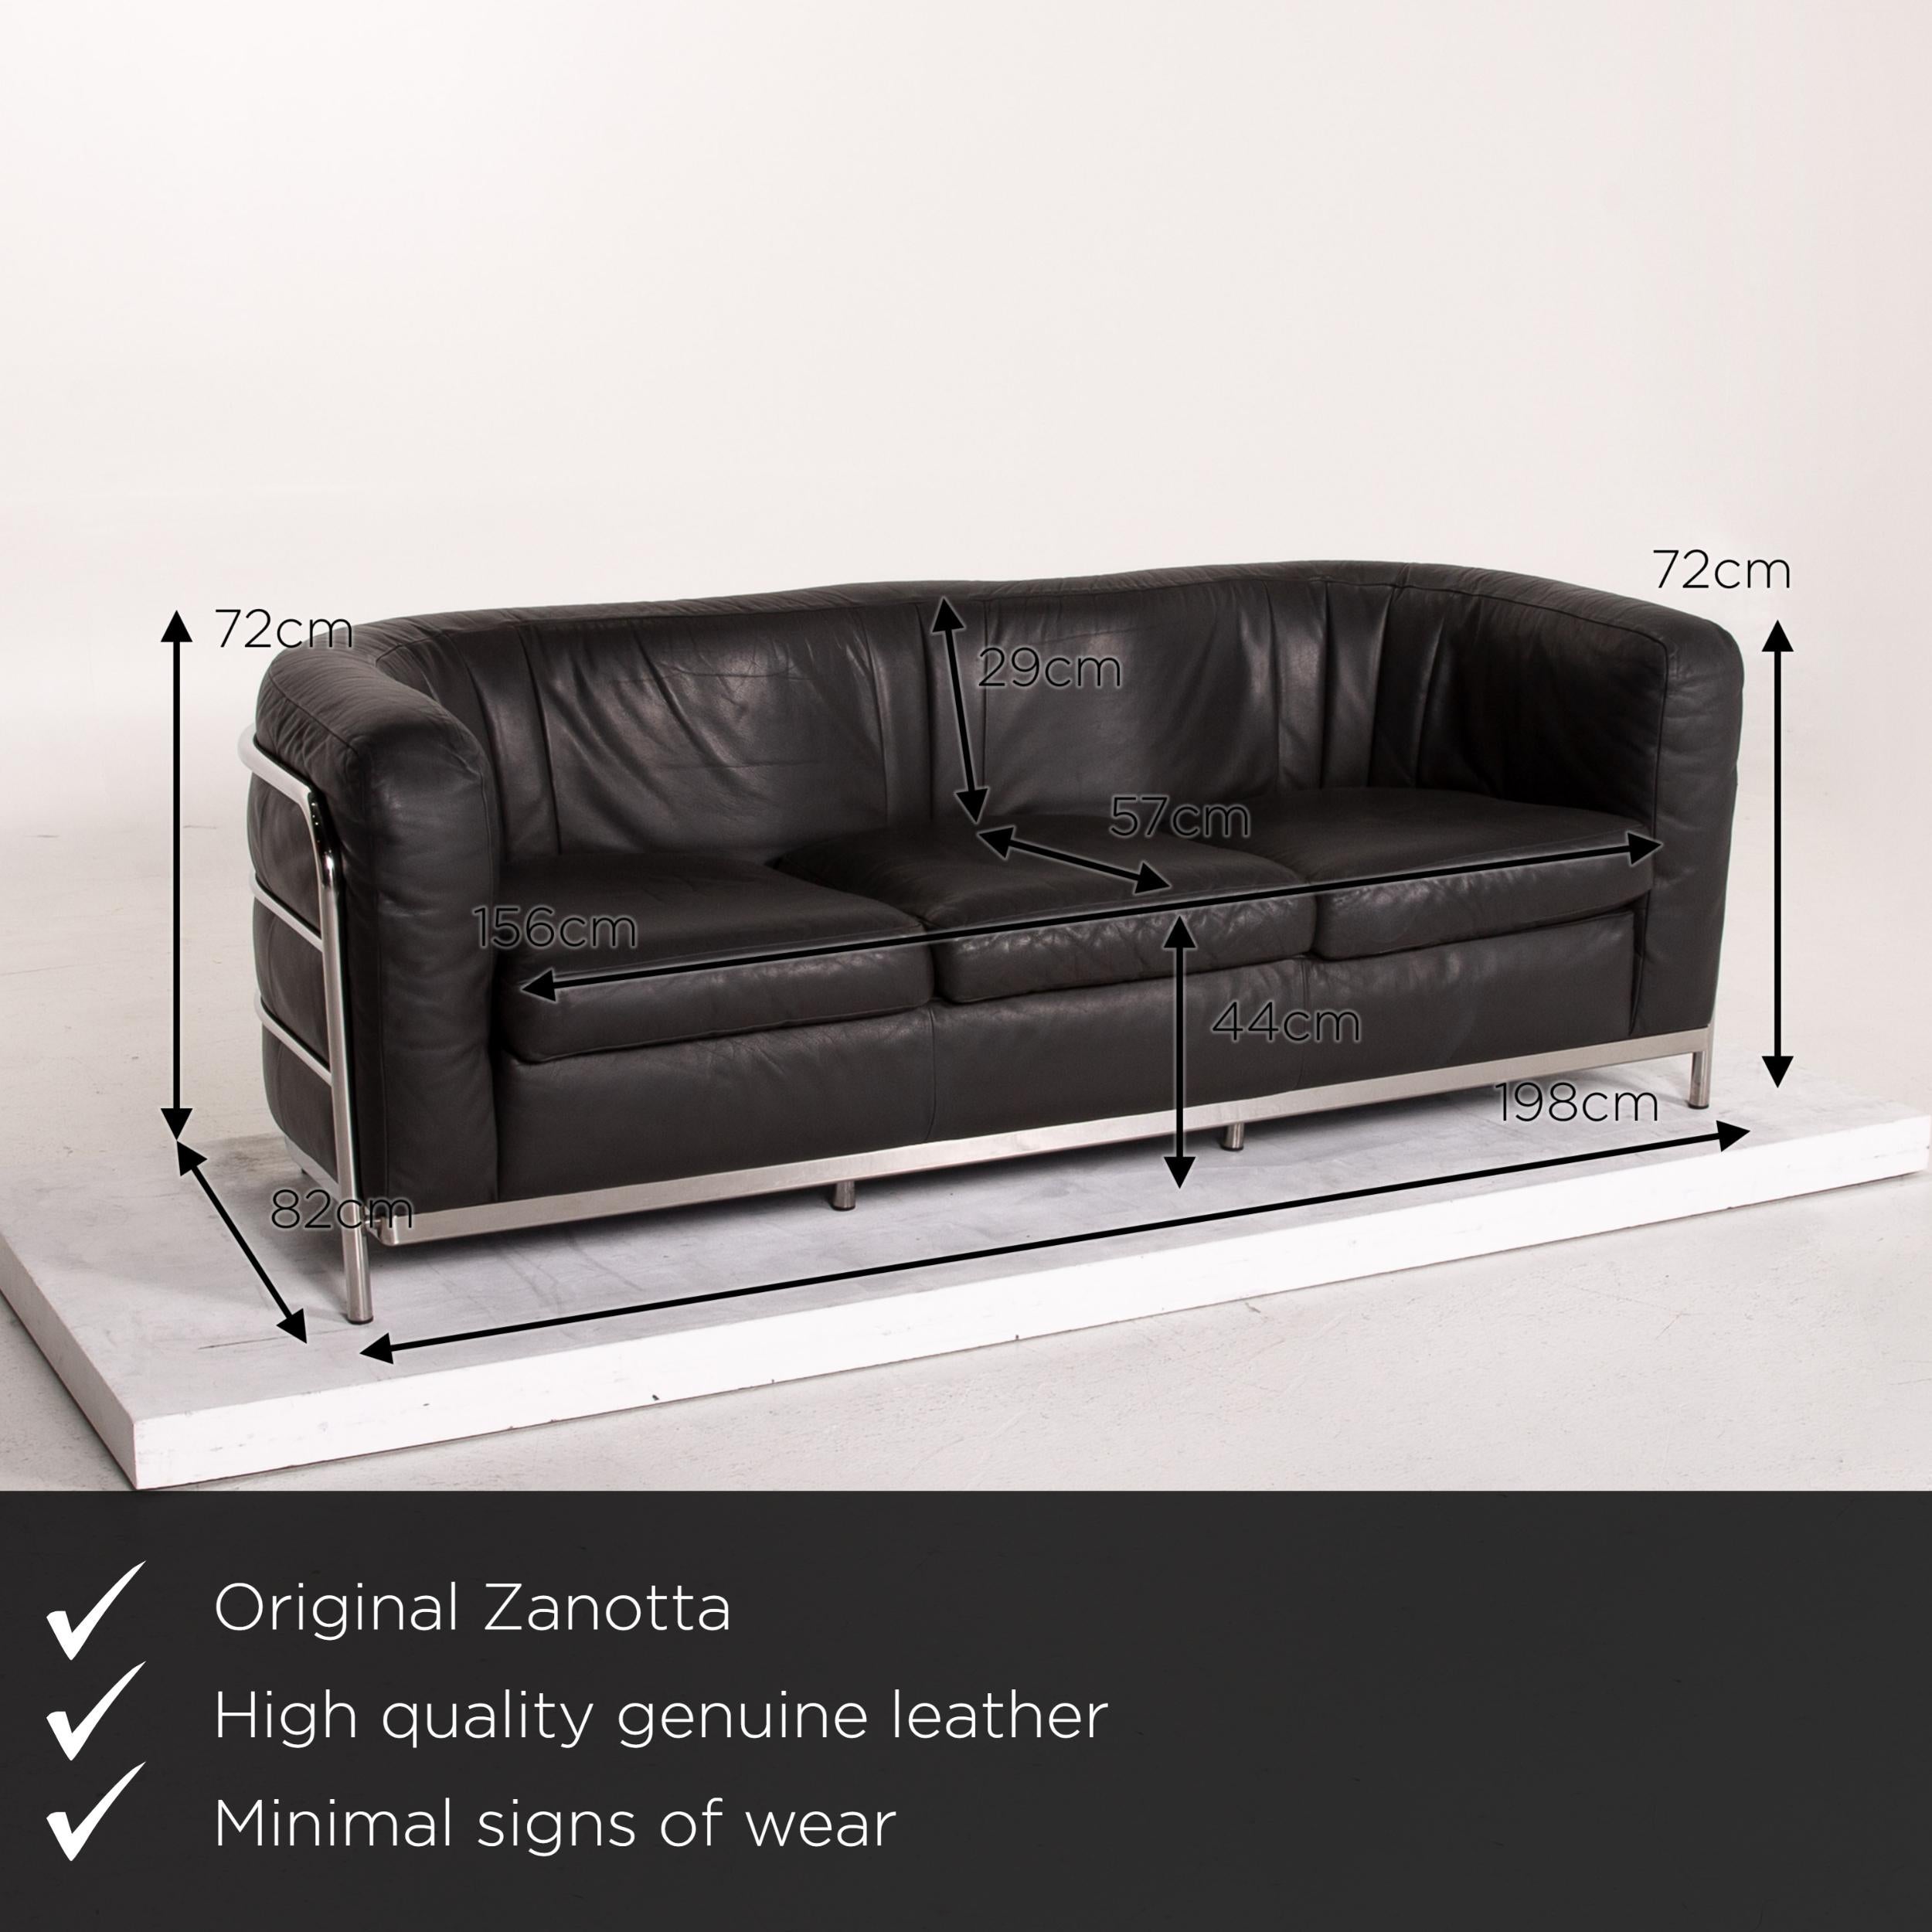 We present to you a Zanotta Onda leather sofa black three-seat couch.
 

 Product measurements in centimeters:
 

Depth 82
Width 198
Height 72
Seat height 44
Rest height 72
Seat depth 57
Seat width 156
Back height 29.
   